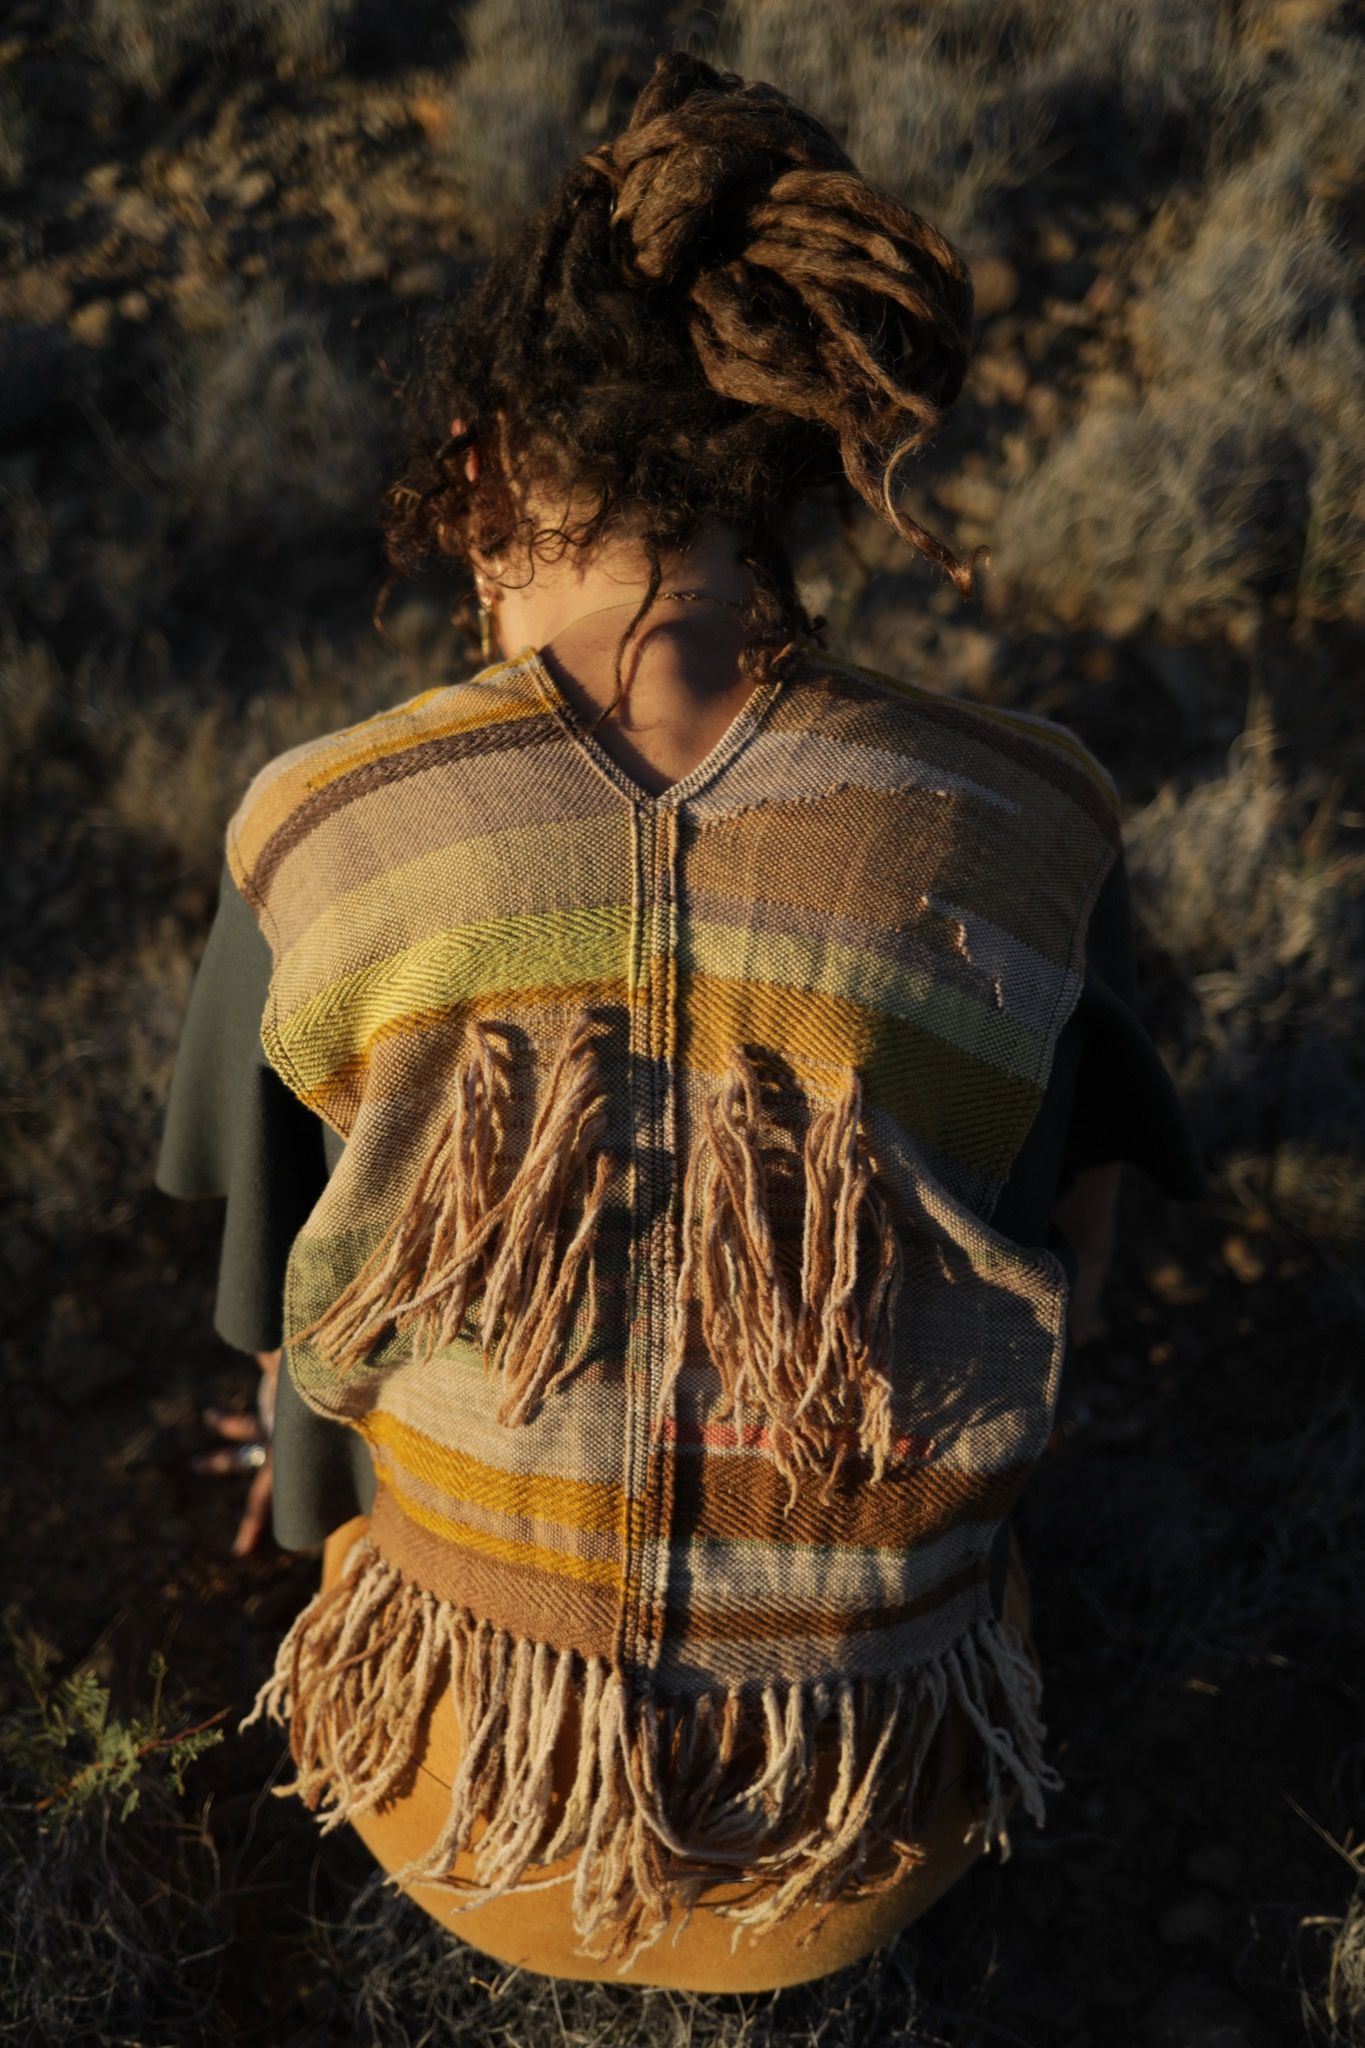 woman wearing brown, grey, red and yellow vest with fringe standing in the desert